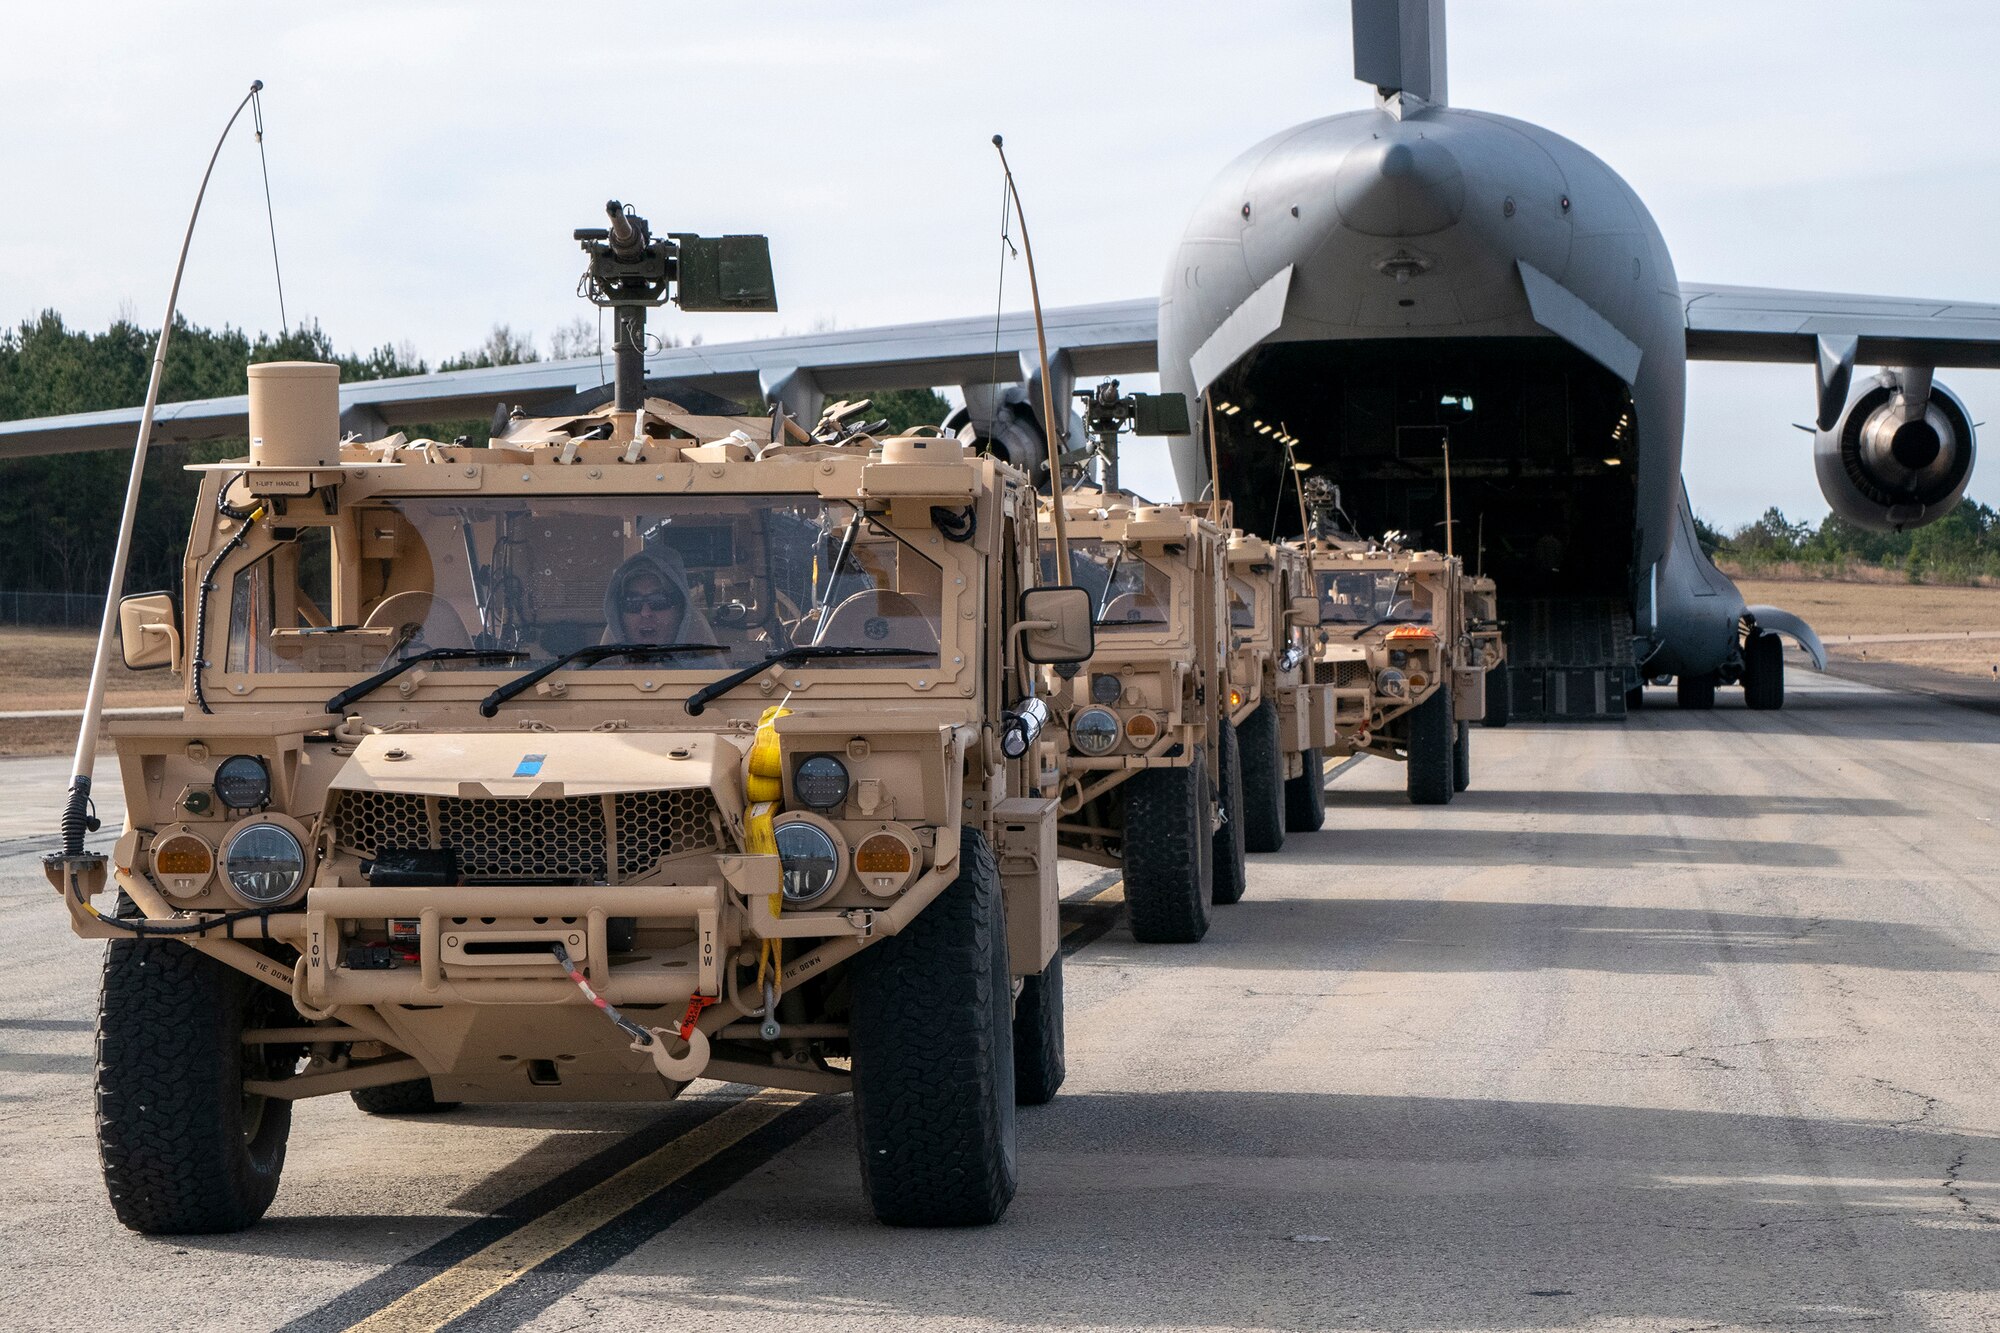 U.S. Army Soldiers and vehicles from the 3rd Special Forces Group prepare to board a Hawaii Air National Guard C-17 Globemaster III Jan. 21, 2019, at Camp Shelby Joint Forces Training Center near Hattiesburg, Miss. The 204th Airlift Squadron transported personnel and vehicles to the Gulfport Combat Readiness Training Center, Miss., during exercise Southern Strike. The annual training is a is a total force, multi-service exercise hosted by the Mississippi Air National Guard’s Combat Readiness Training Center in Gulfport,